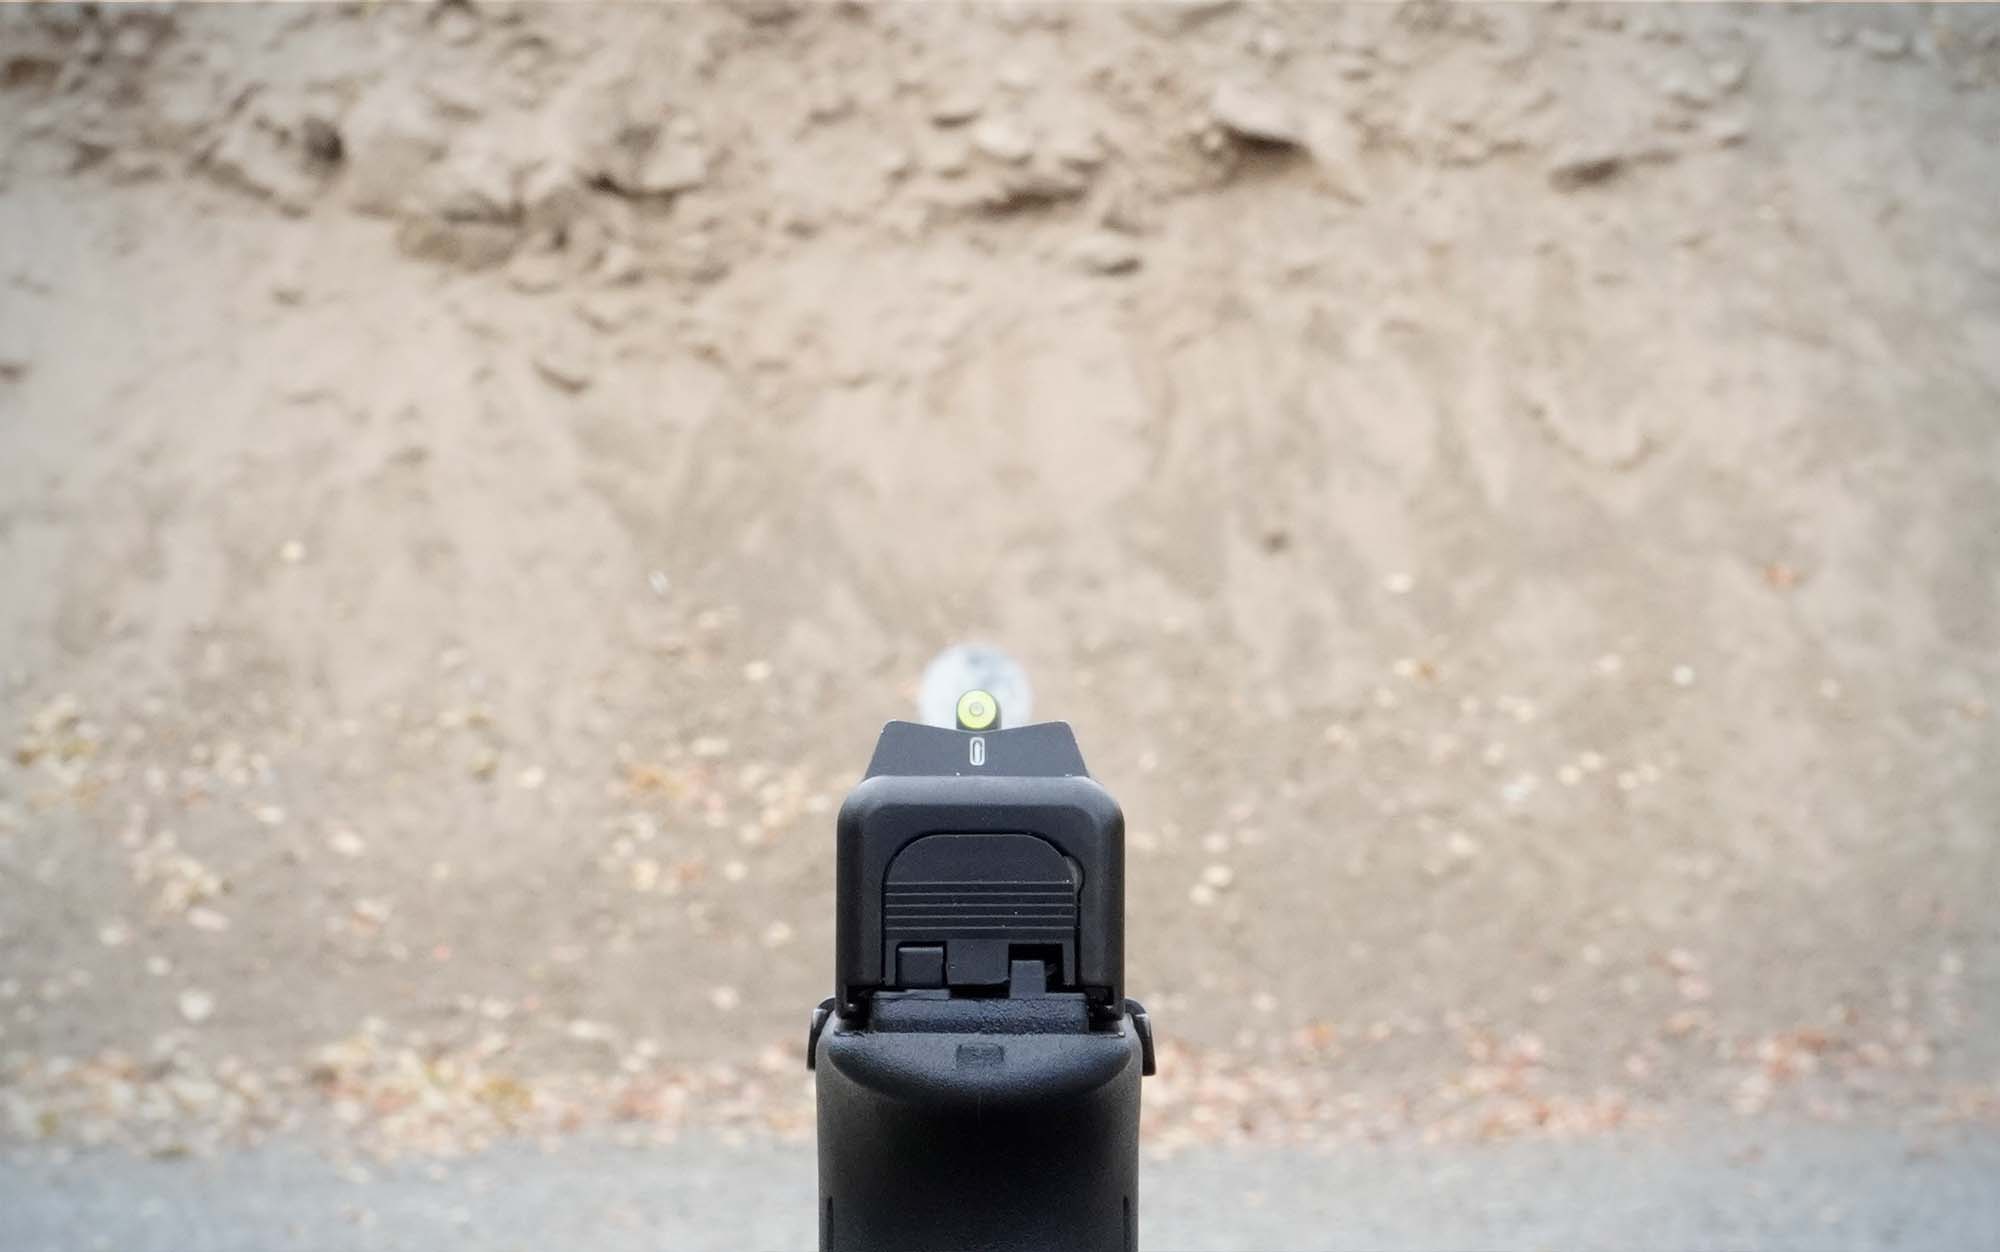 Express Glock Sights from XS.